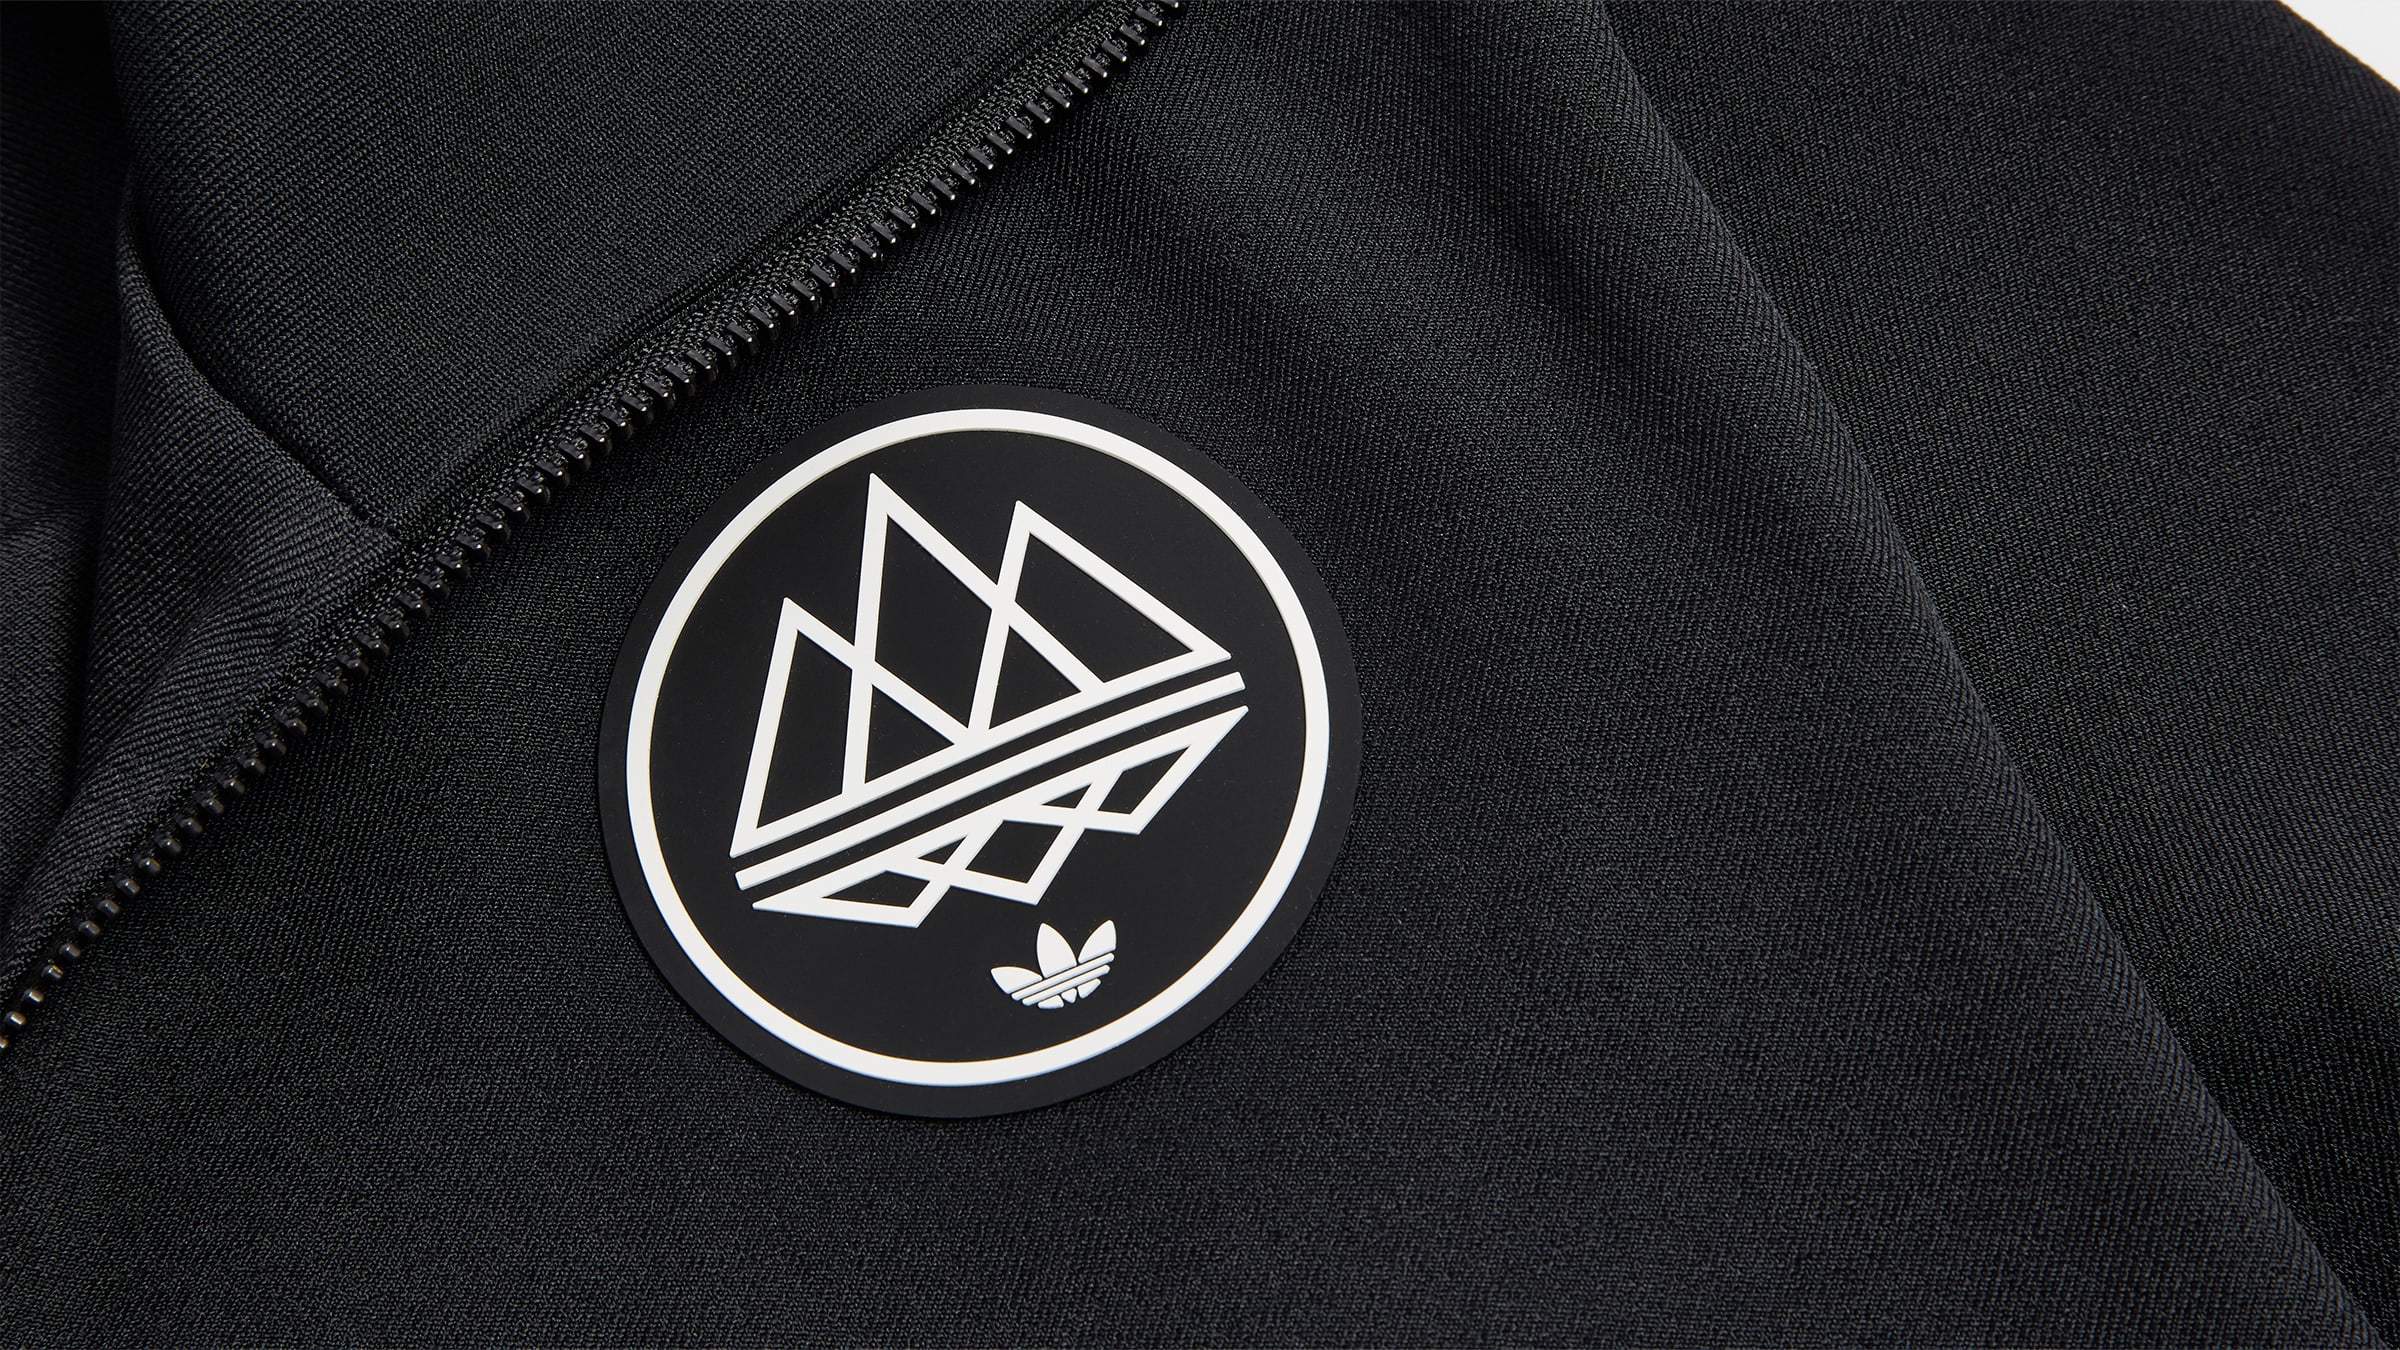 Adidas SPZL Marnach Track Top (Black) | END. Launches